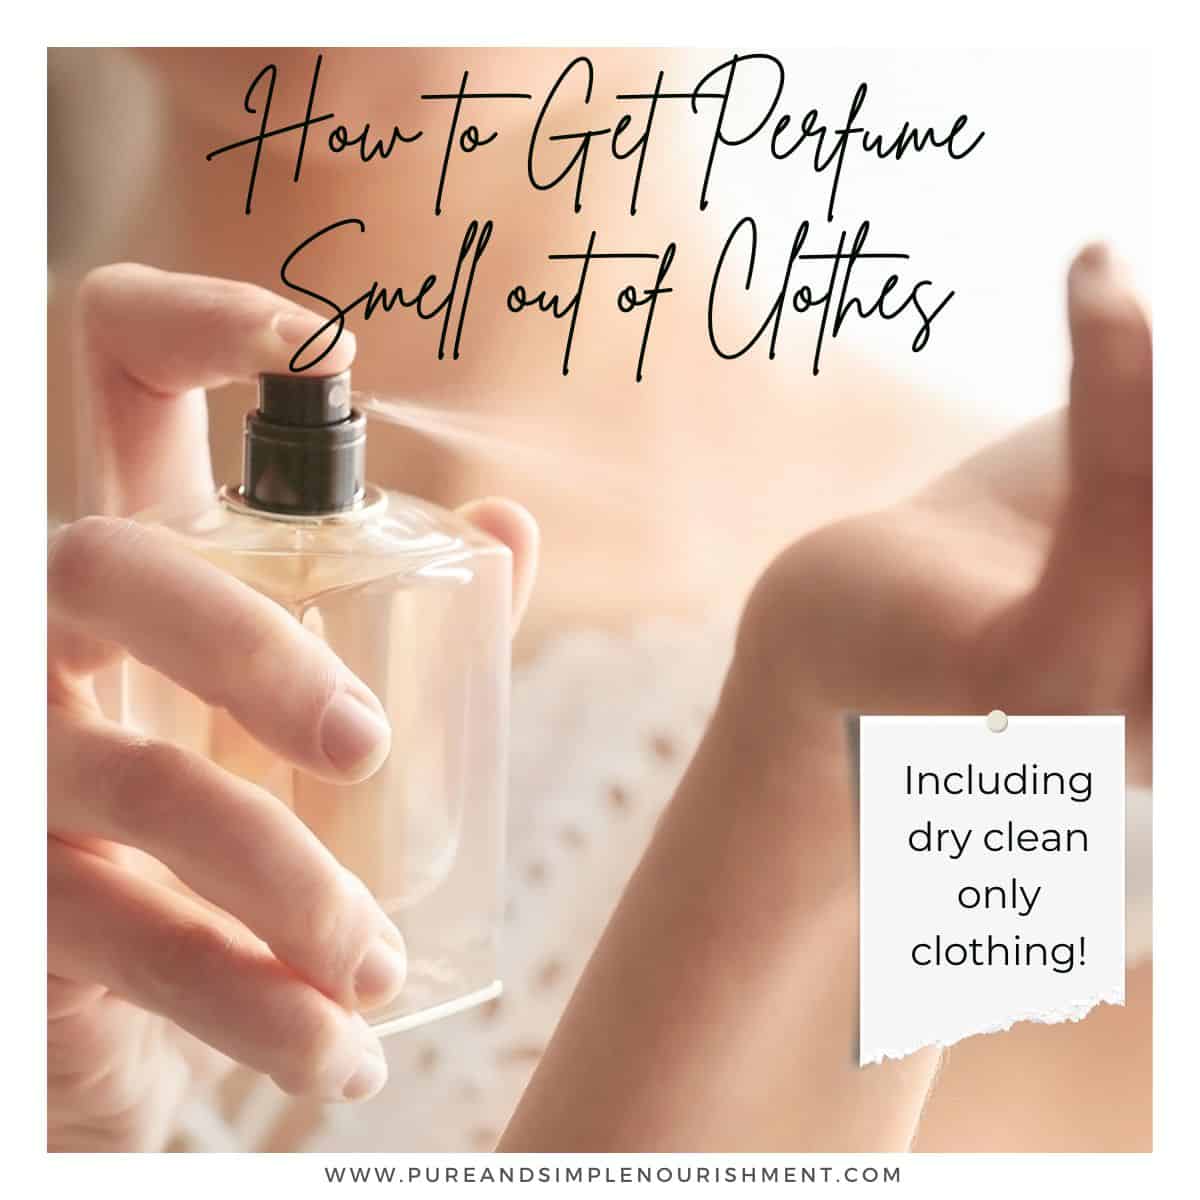 Perfume being sprayed on a wrist with the title How to Get Perfume Smell out of Clothes over it.